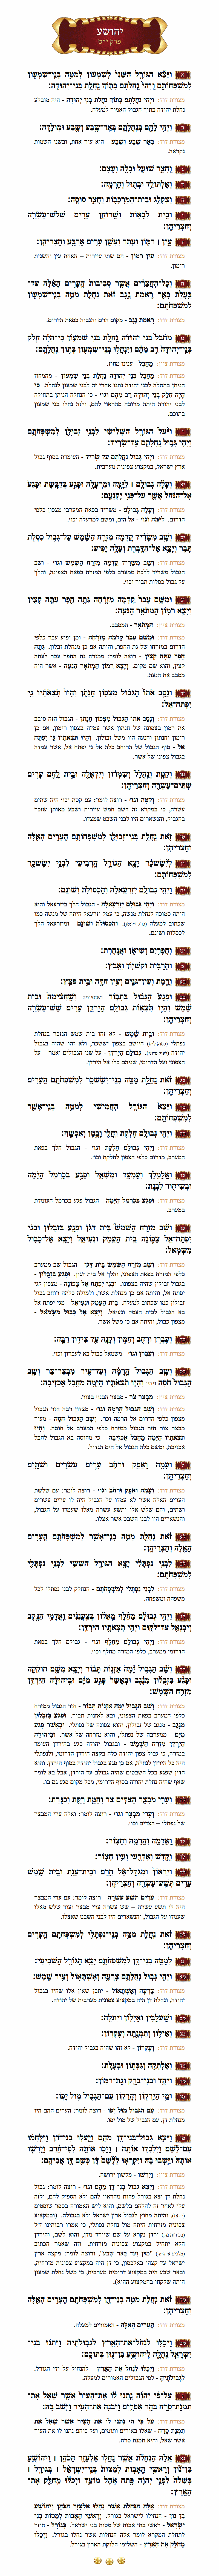 Sefer Yehoshua Chapter 19 with commentary